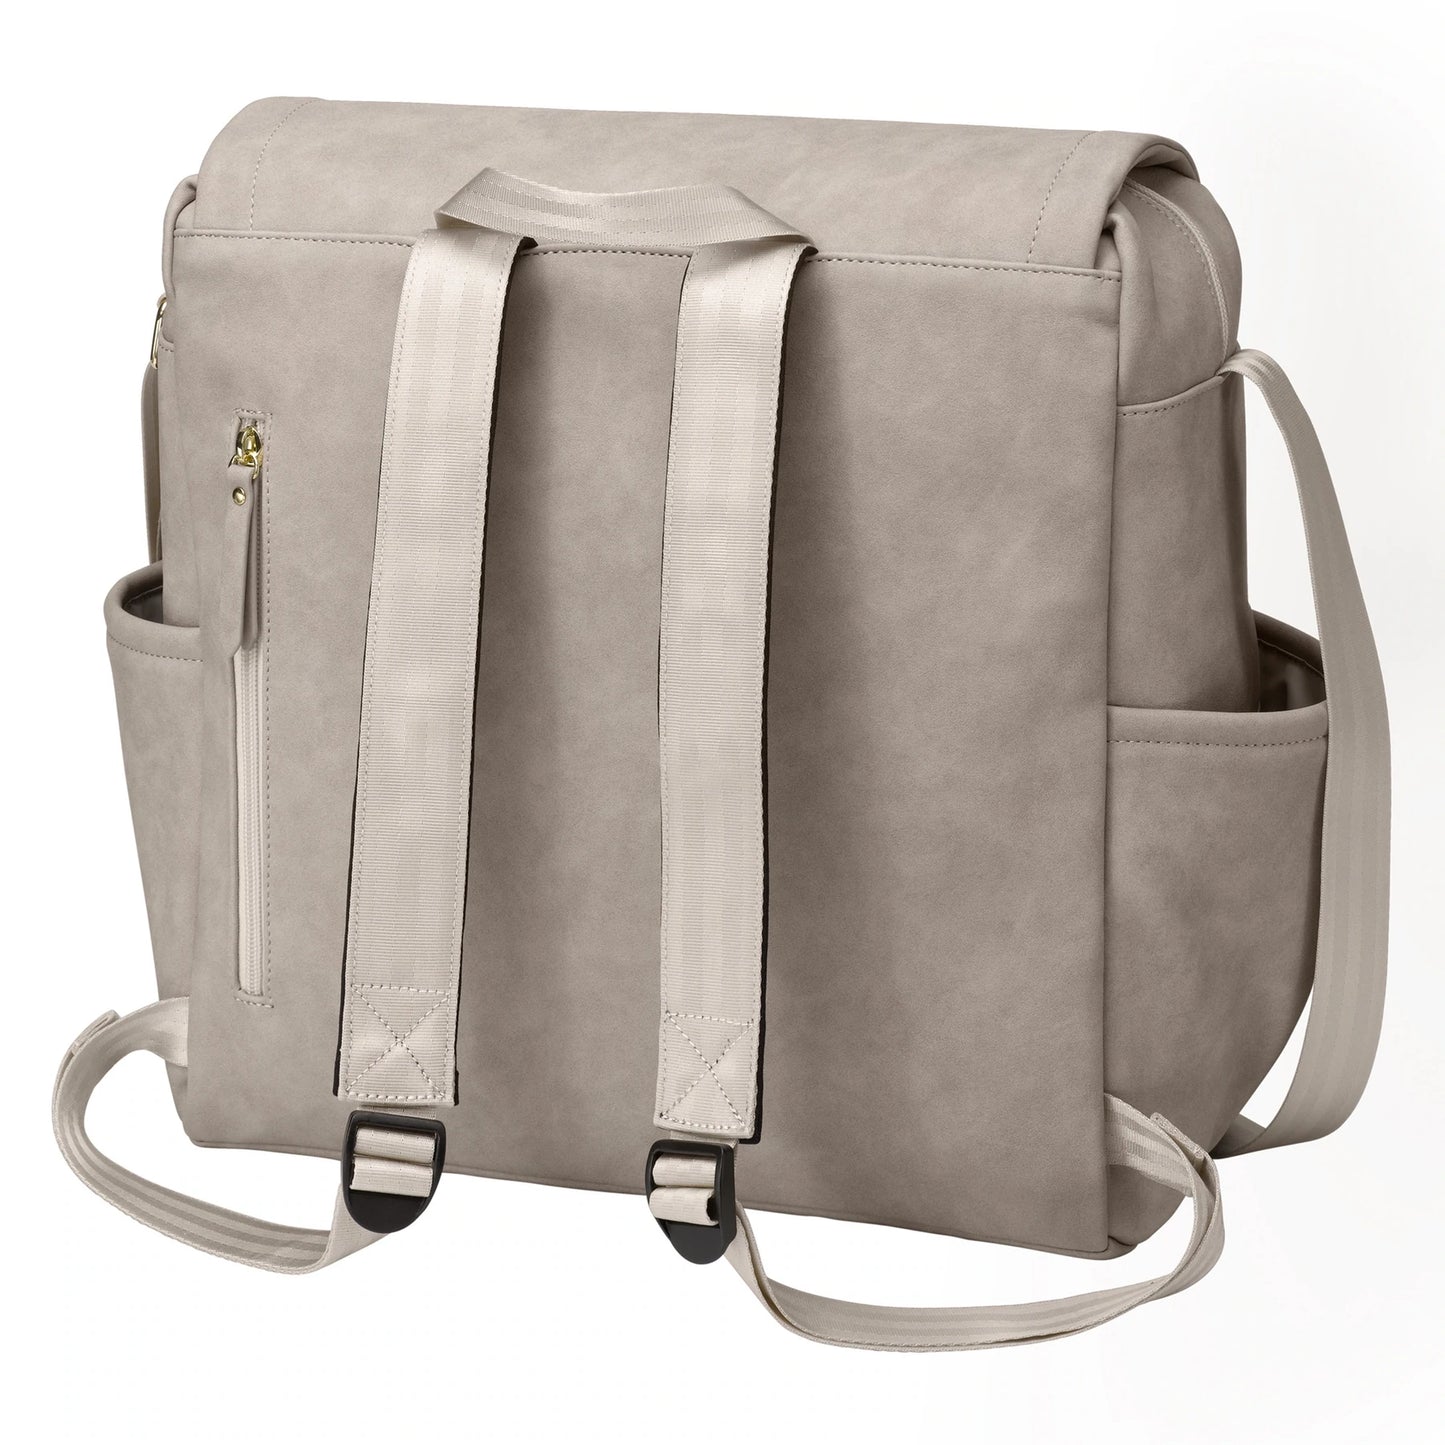 Petunia Pickle Bottom Boxy Backpack In Grey Matte Leatherette